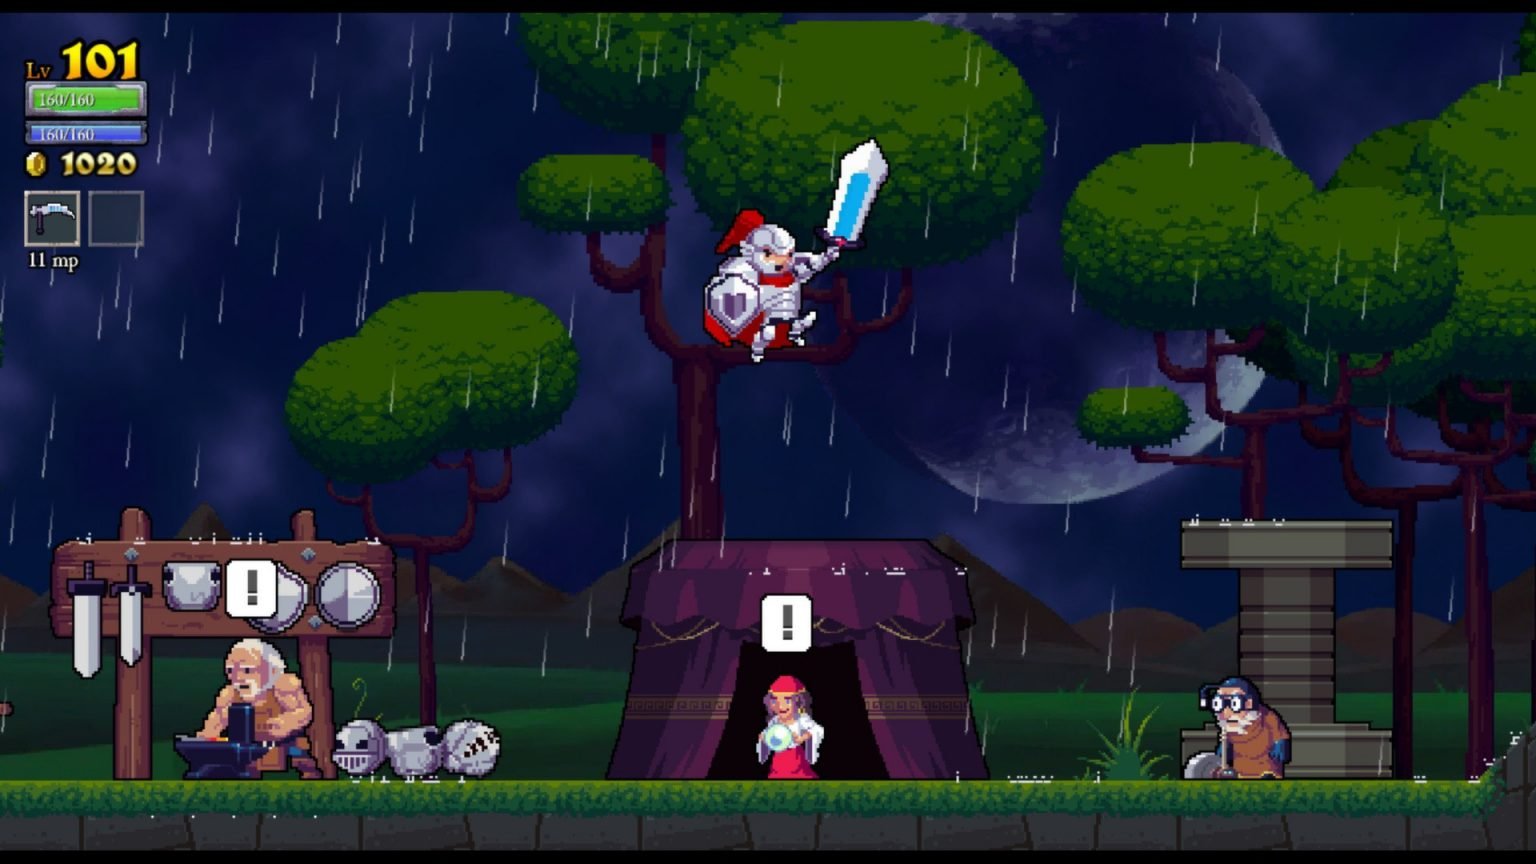 Rogue Legacy 2 for ios download free